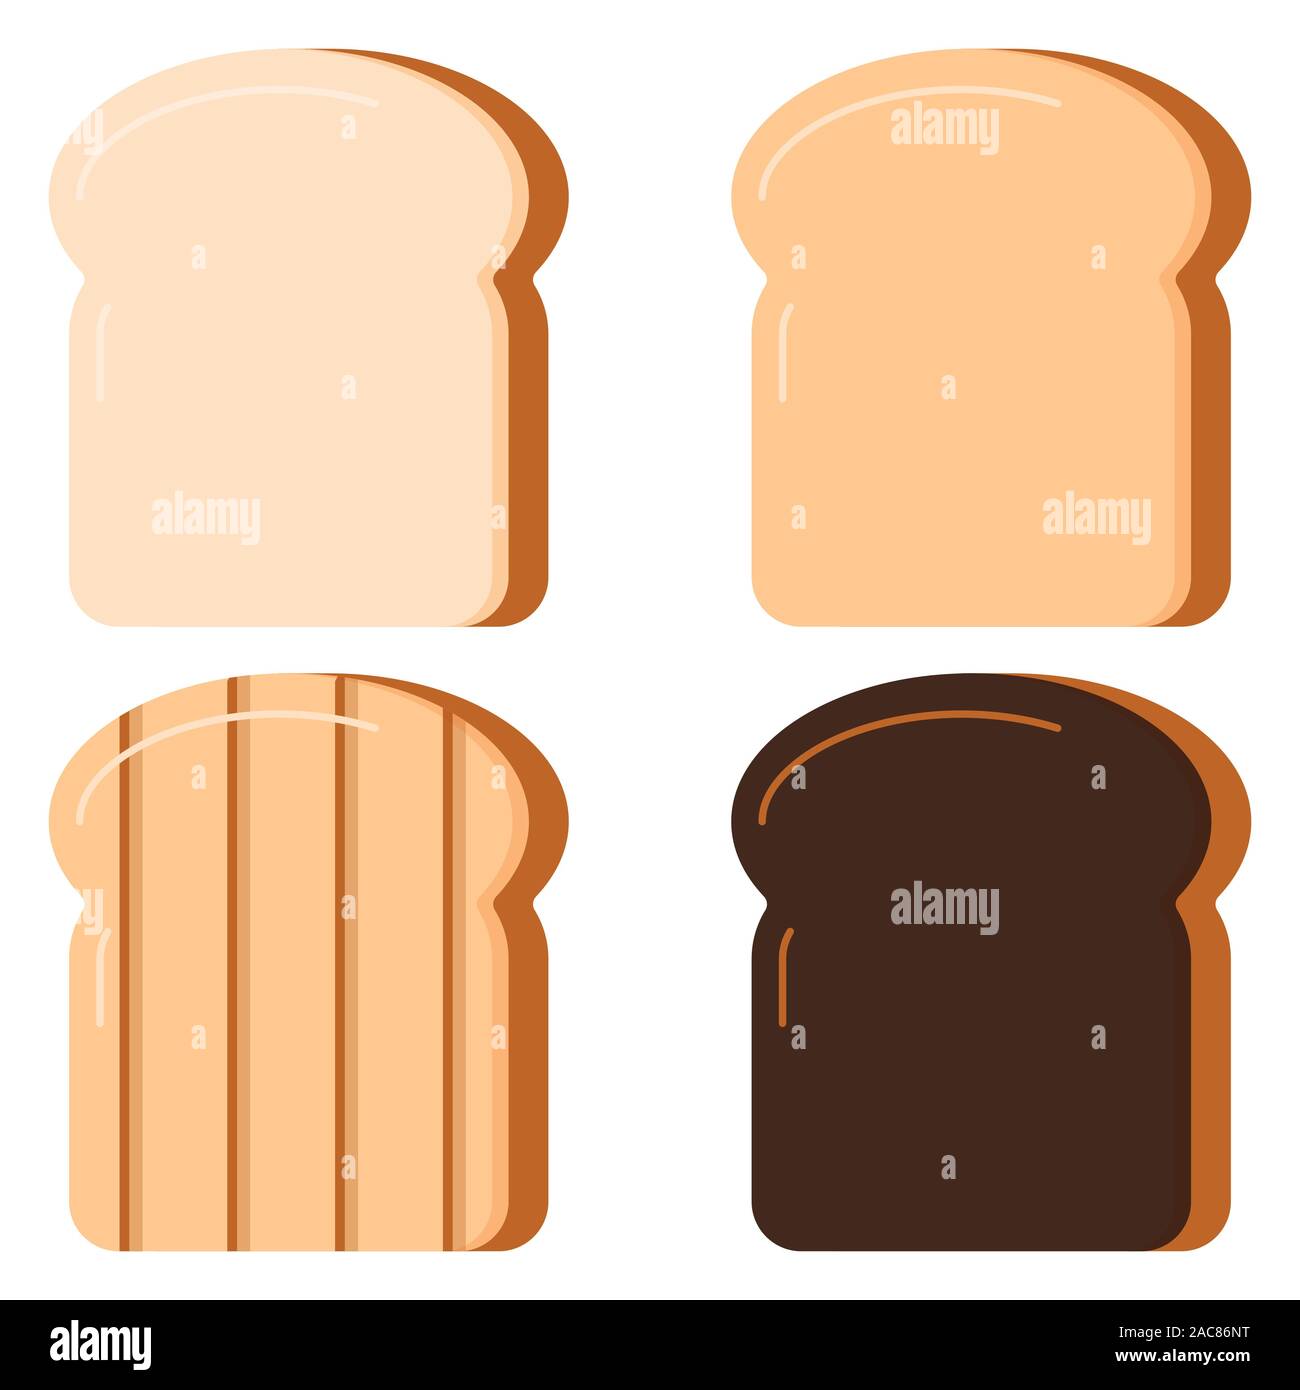 Toasts bread vector set isolated on white background. Stock Vector